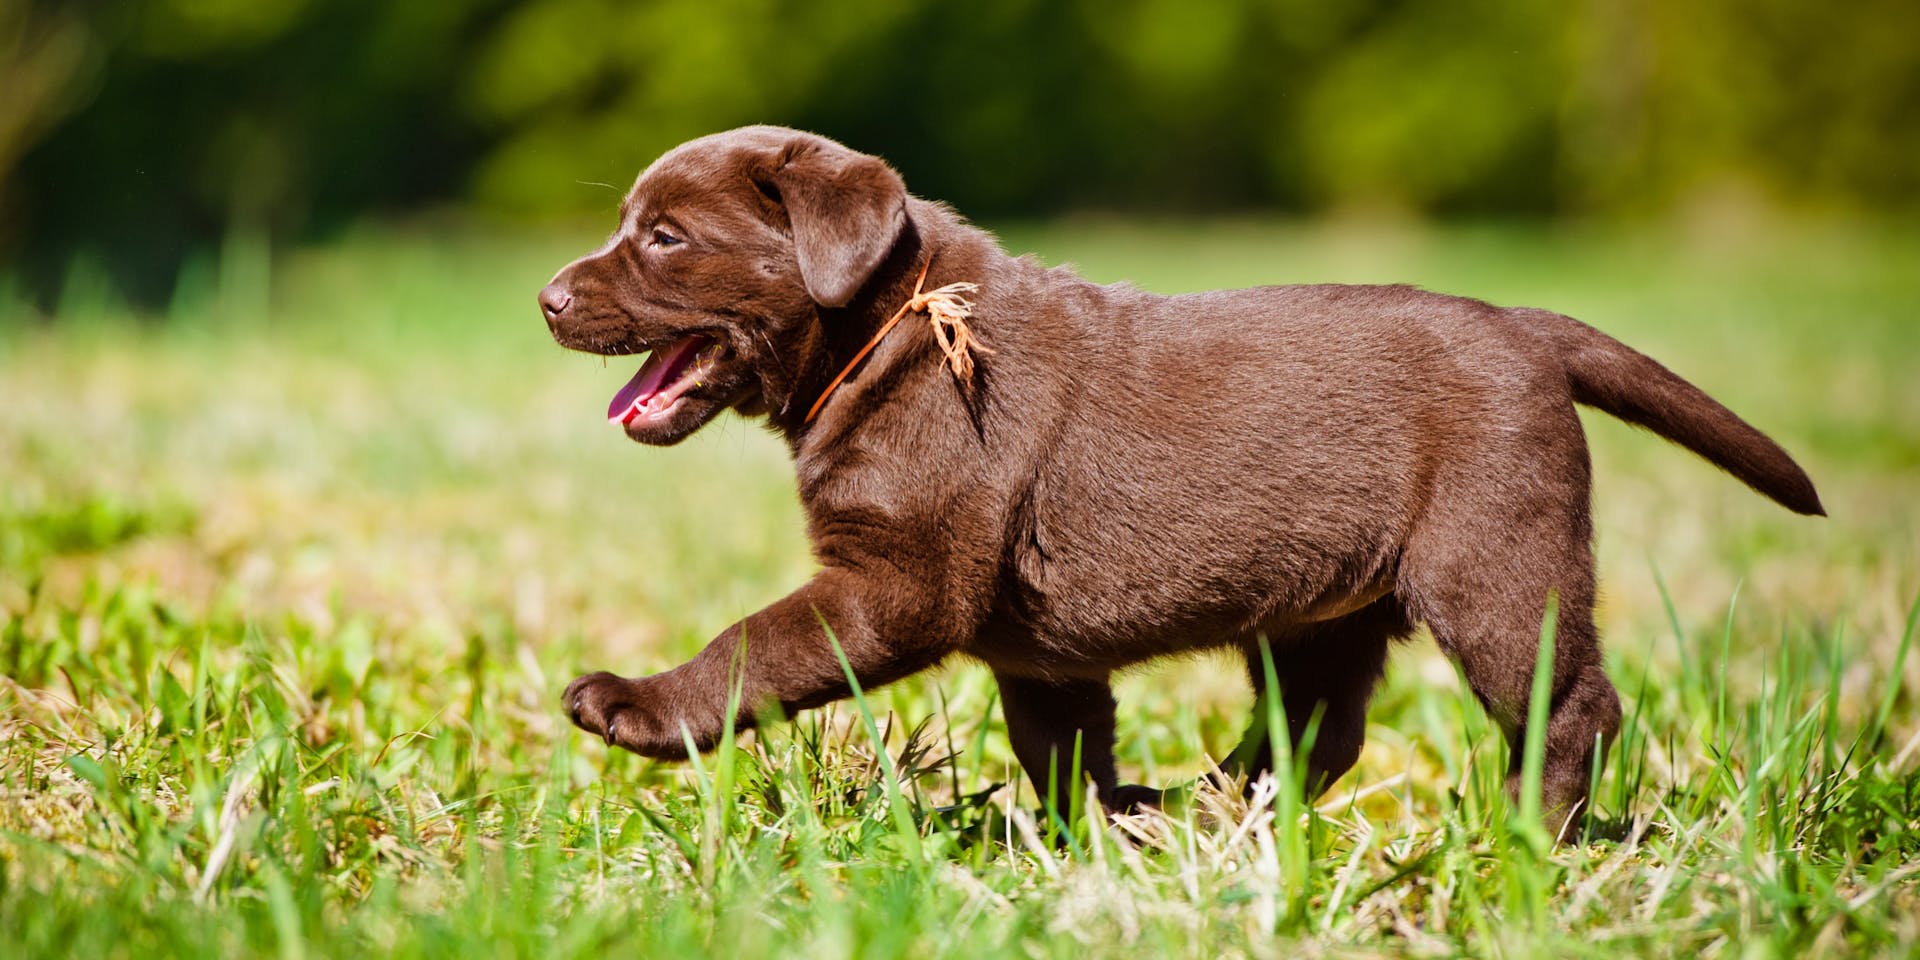 Chocolate lab puppy in a field.